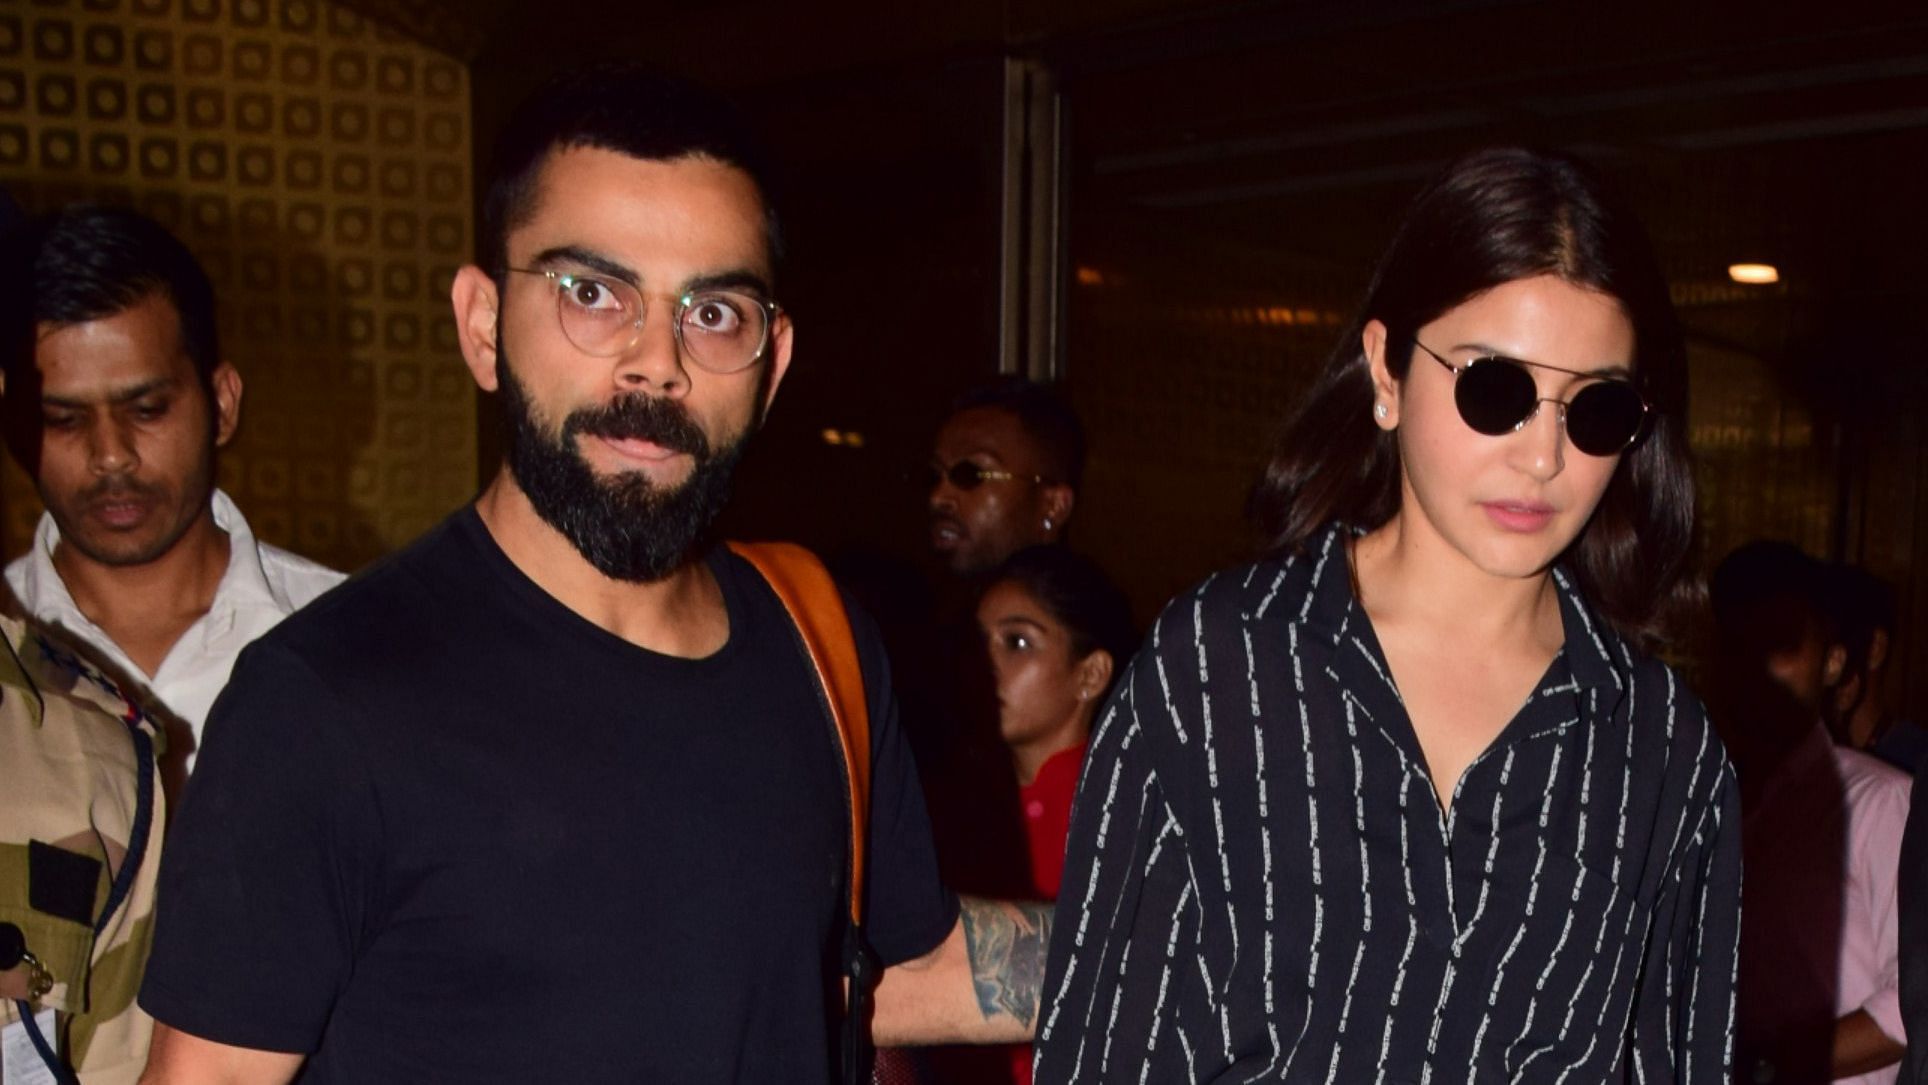 Virat was seen at the Mumbai airport on Thursday along with Bollywood actor and wife Anushka Sharma.